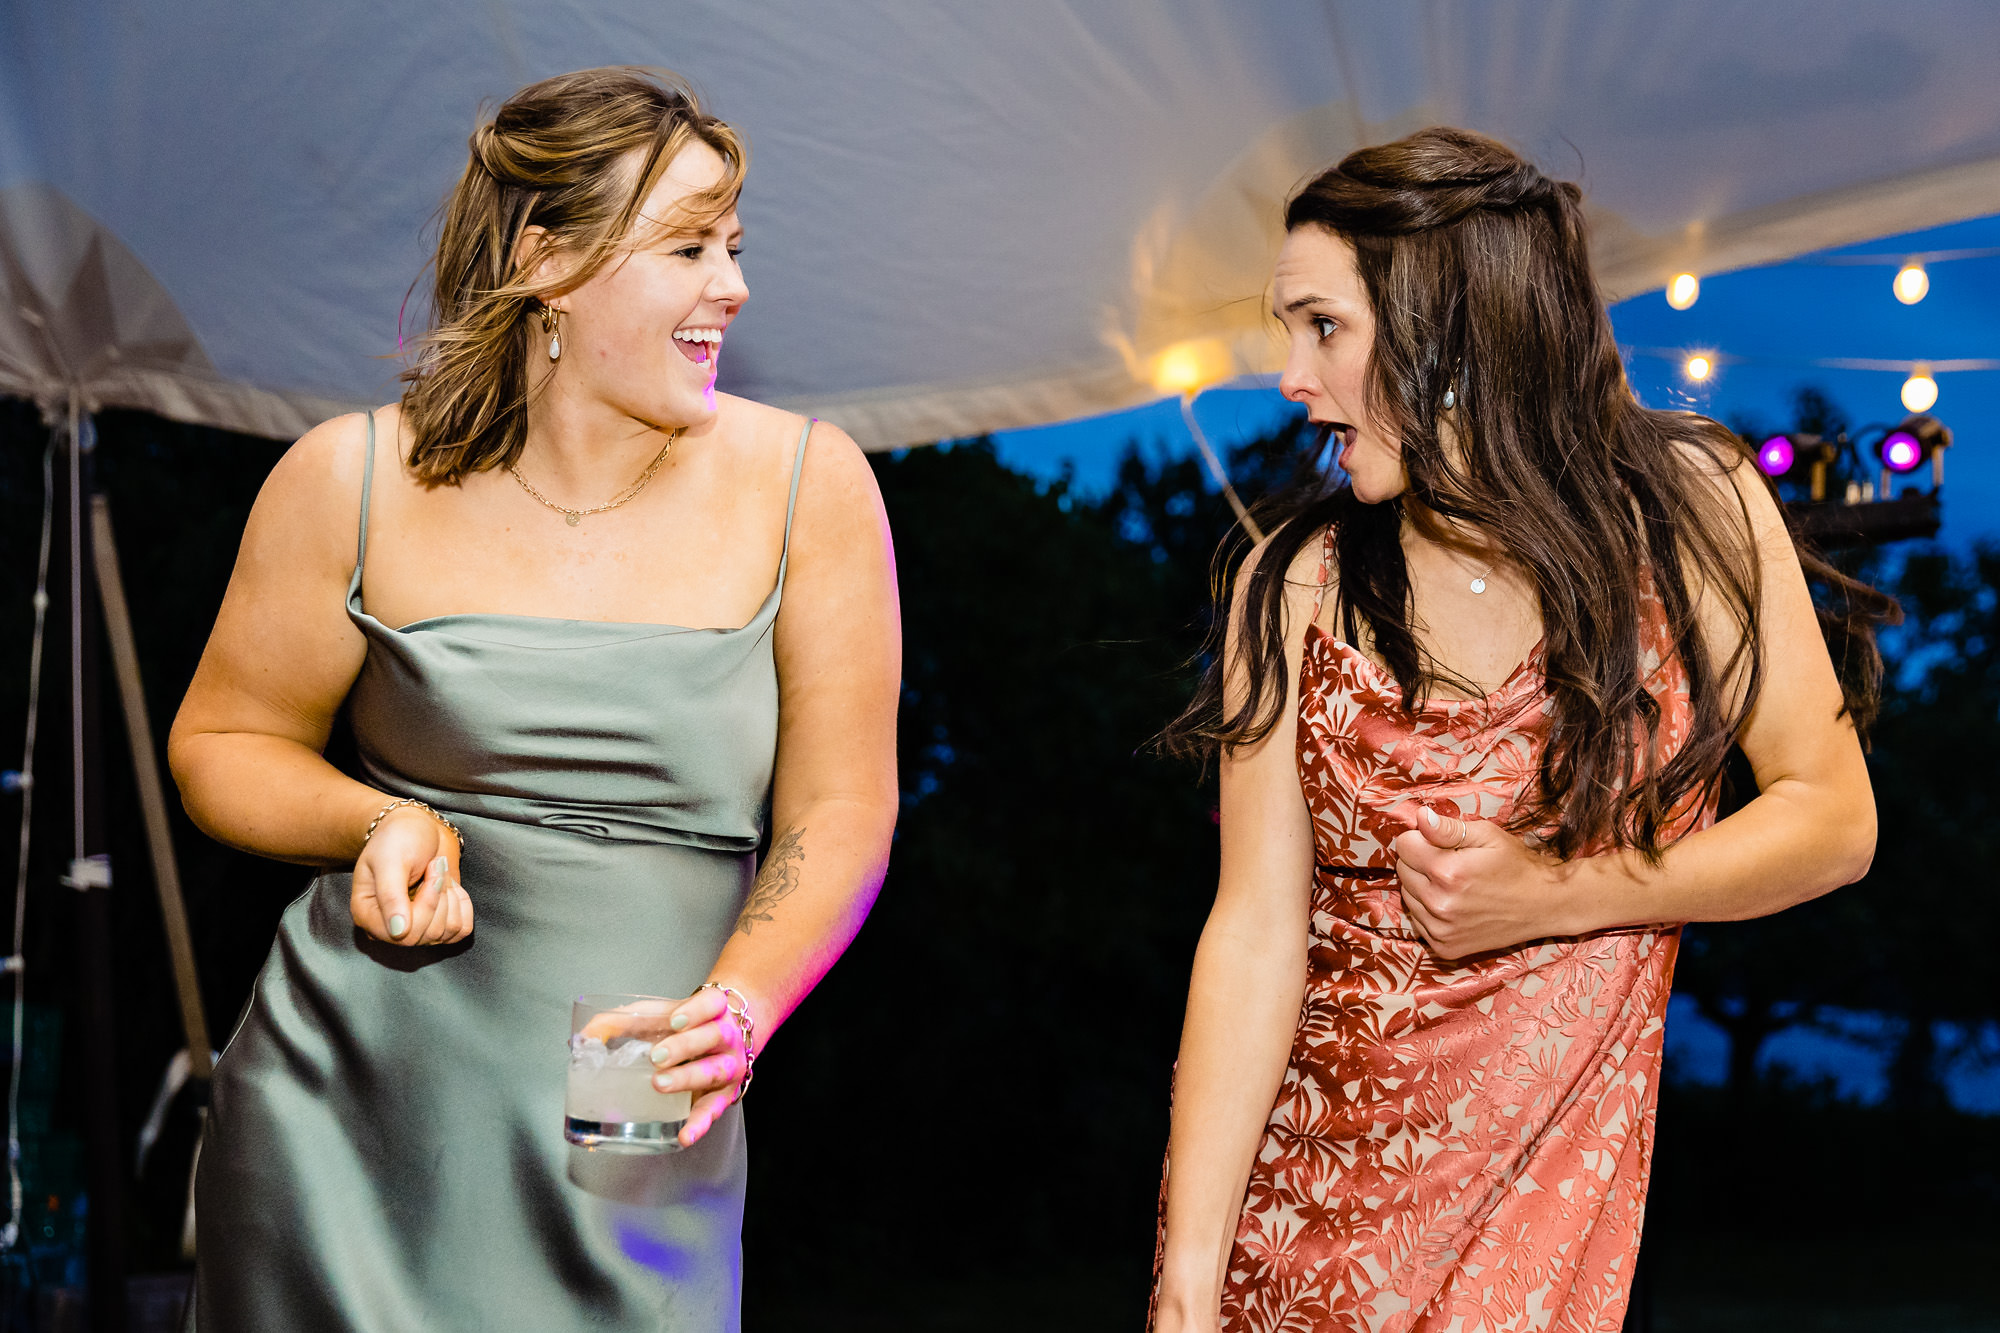 An energetic dance floor at a wedding on Chebeague Island, Maine